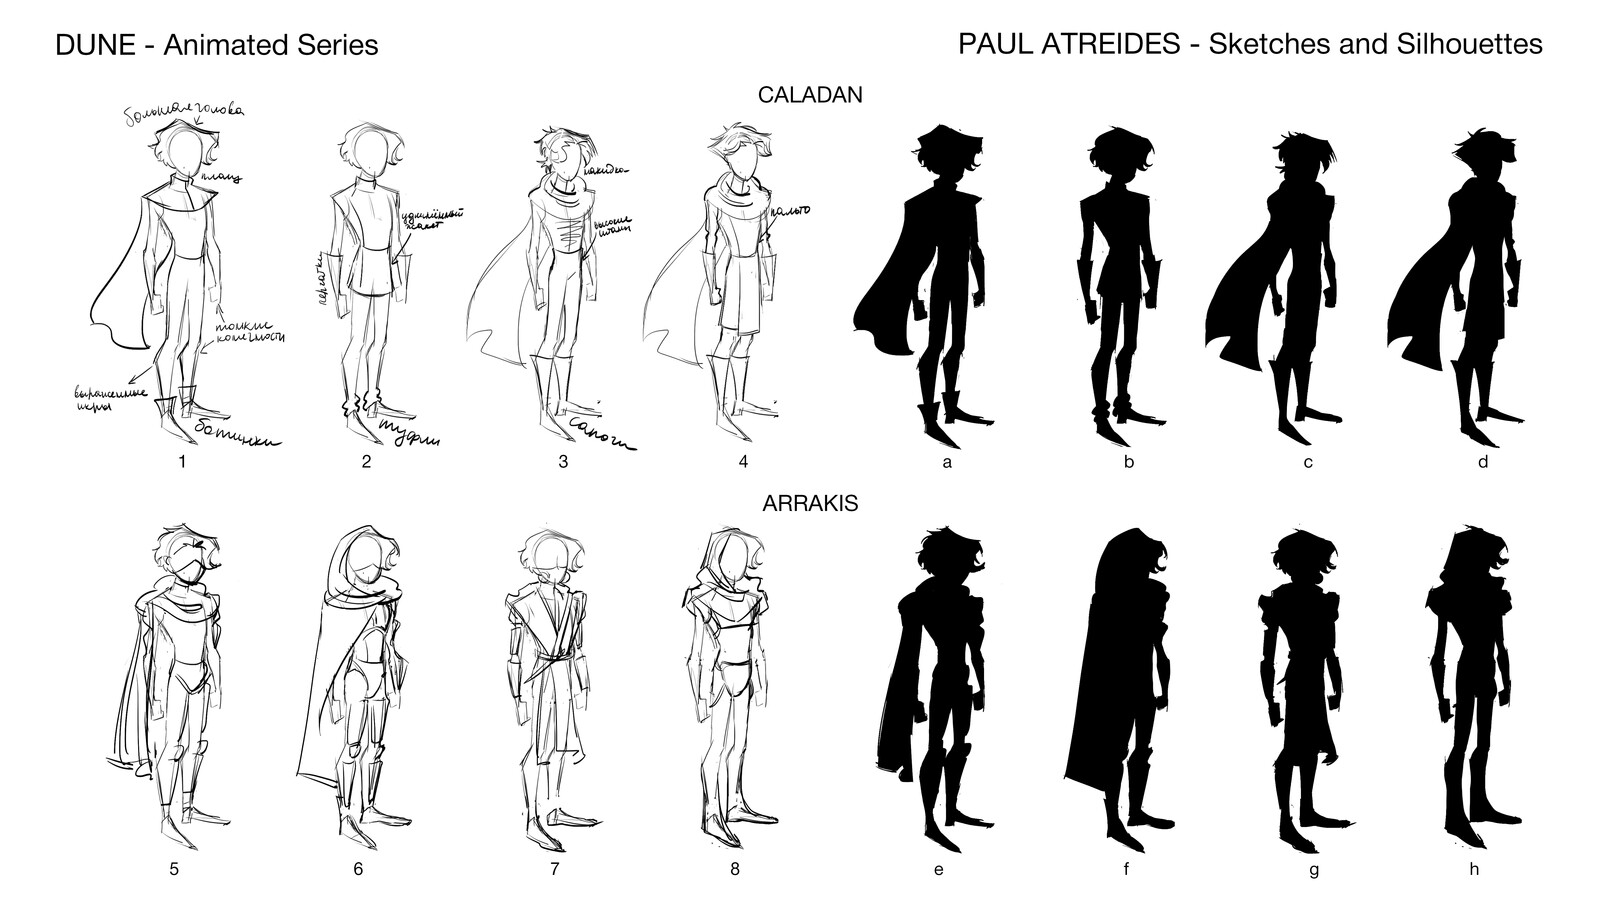 I drew thumbnails and silhouettes for the first read to see which general shape would look best. Since this character appears in two different environments, I am working on both appearances.